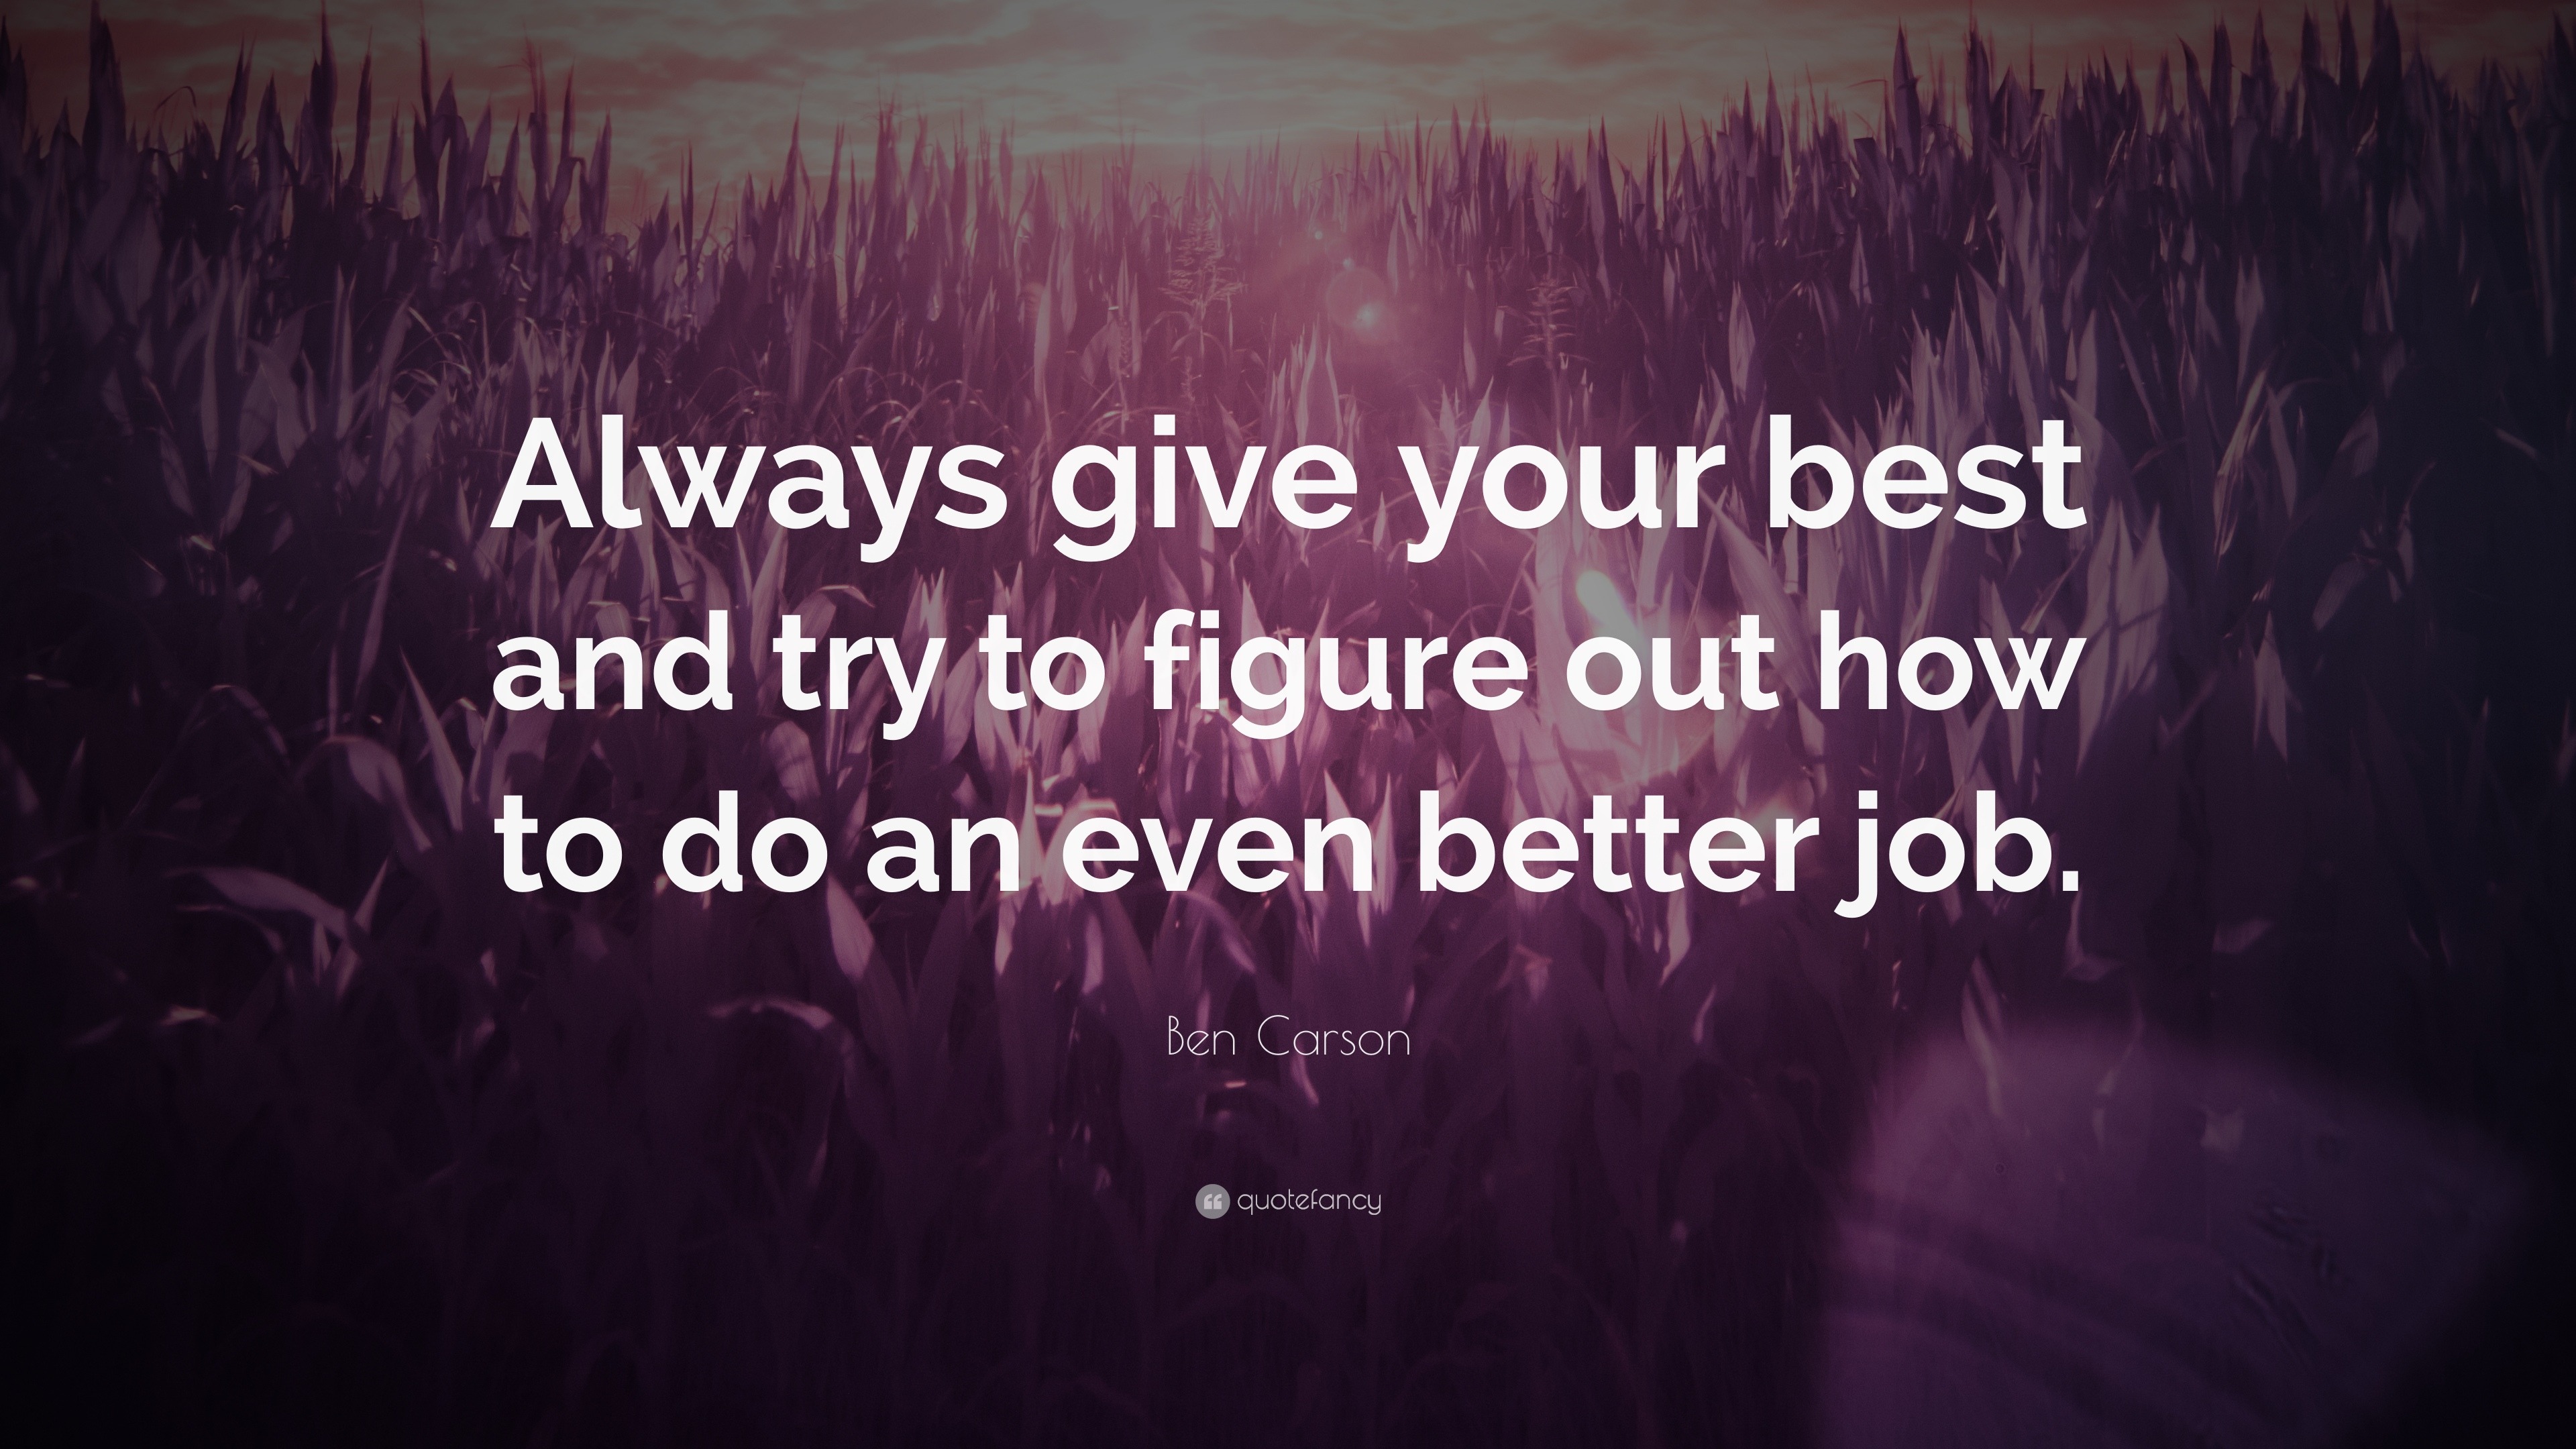 Ben Carson Quote “Always give your best and try to figure